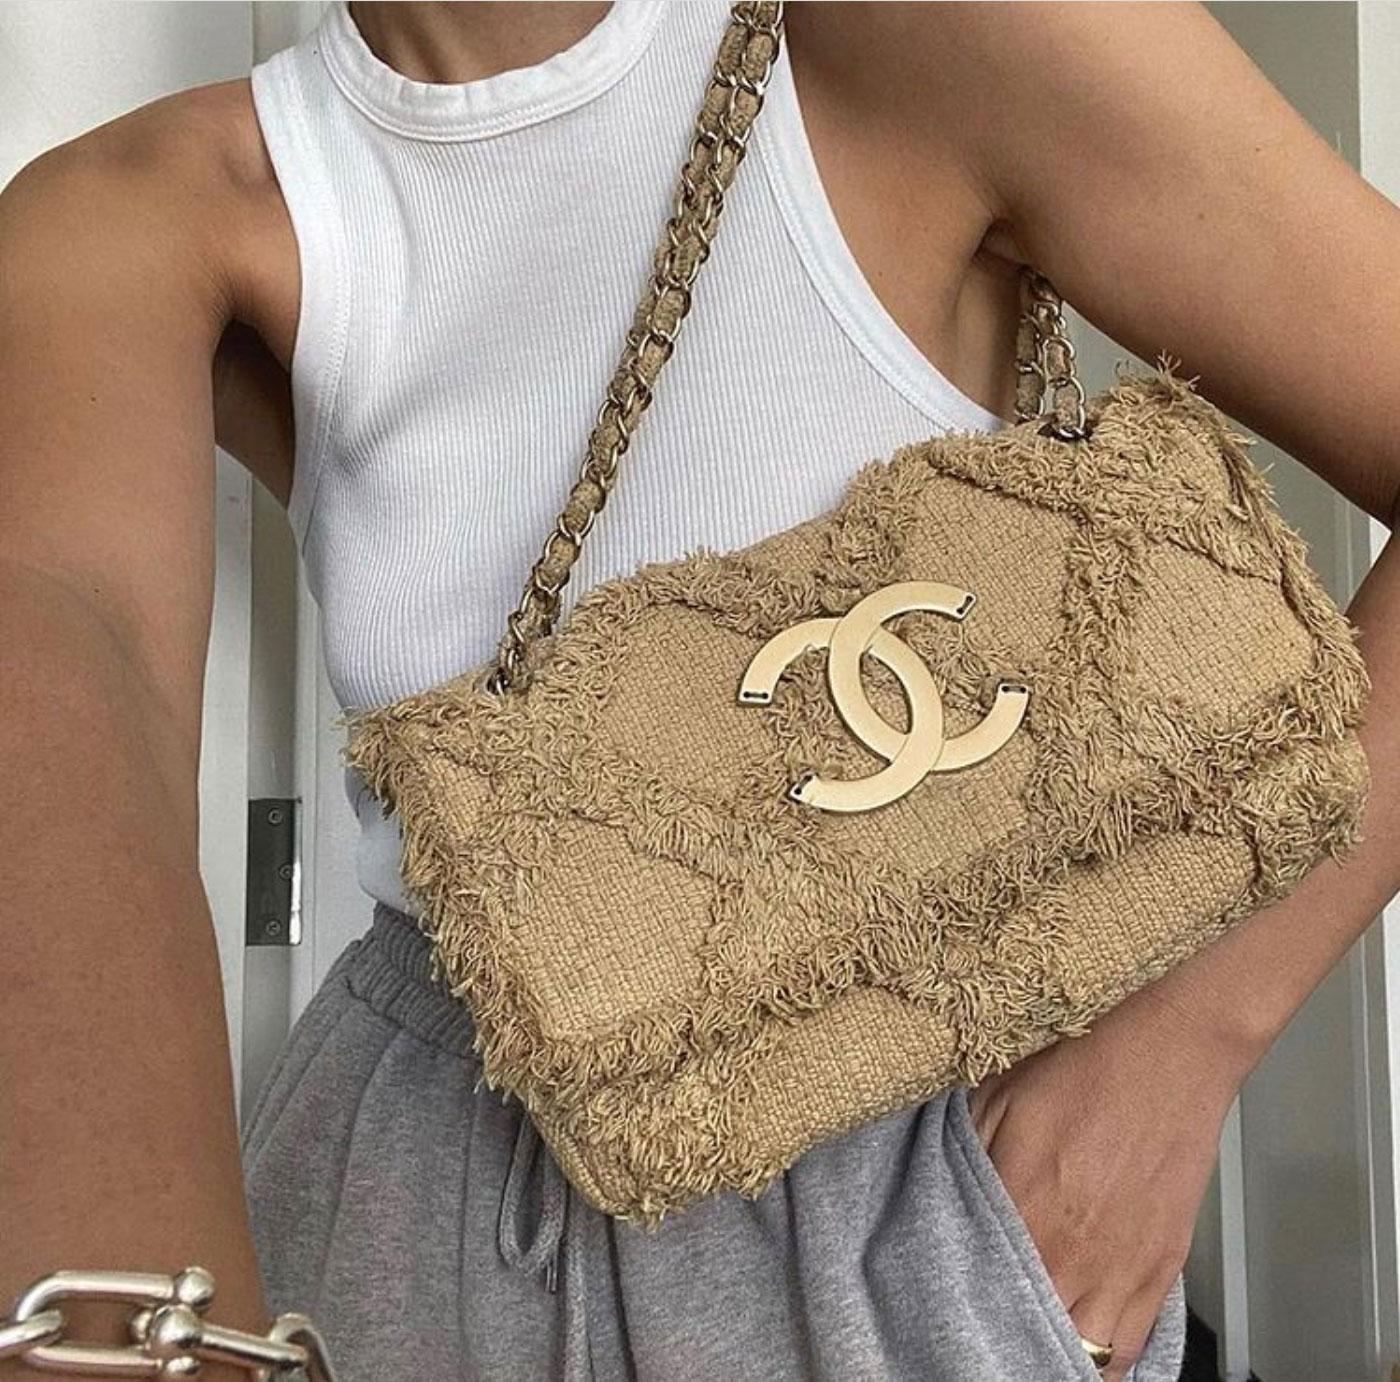 Chanel small sized beige nature tweed crochet flap

2009
Antique gold hardware
Large CC logo
Magnetic clasp closure
Interior beige canvas lining
Interior center zippered pocket
Flat bottom
6